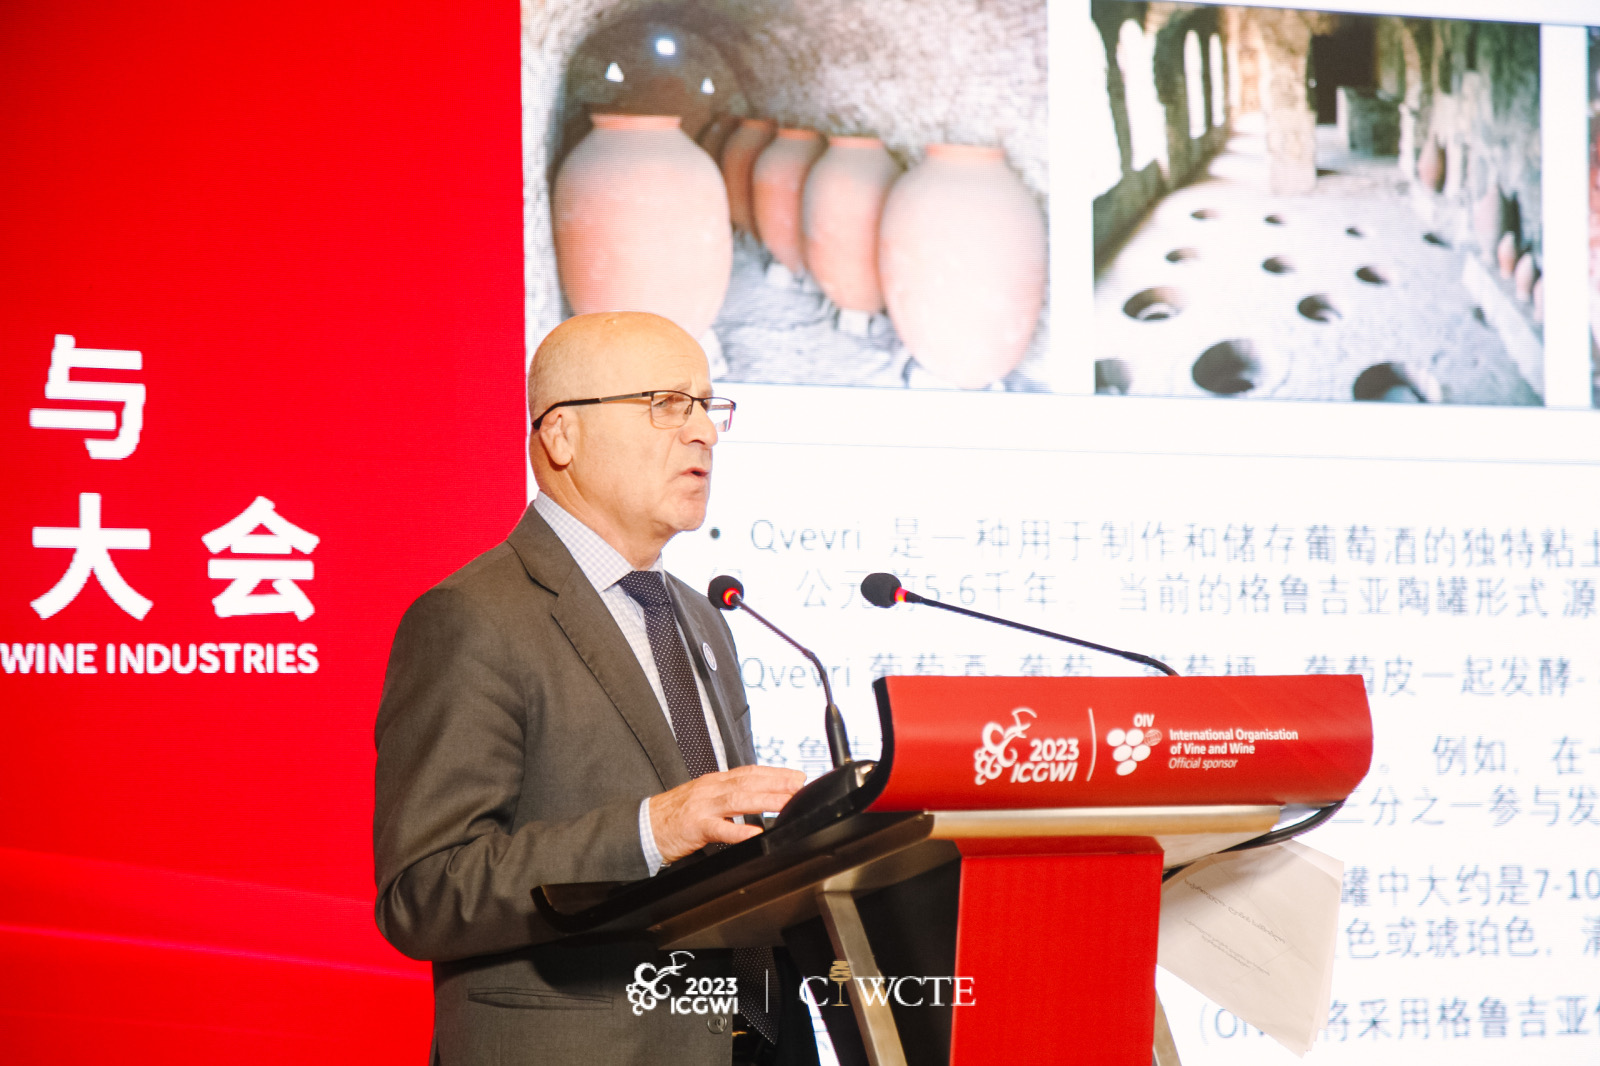 Georgia: Yuri Nozadze attends 3rd Intl Exhibition of Wine Culture and Tourism of China in Yinchuan